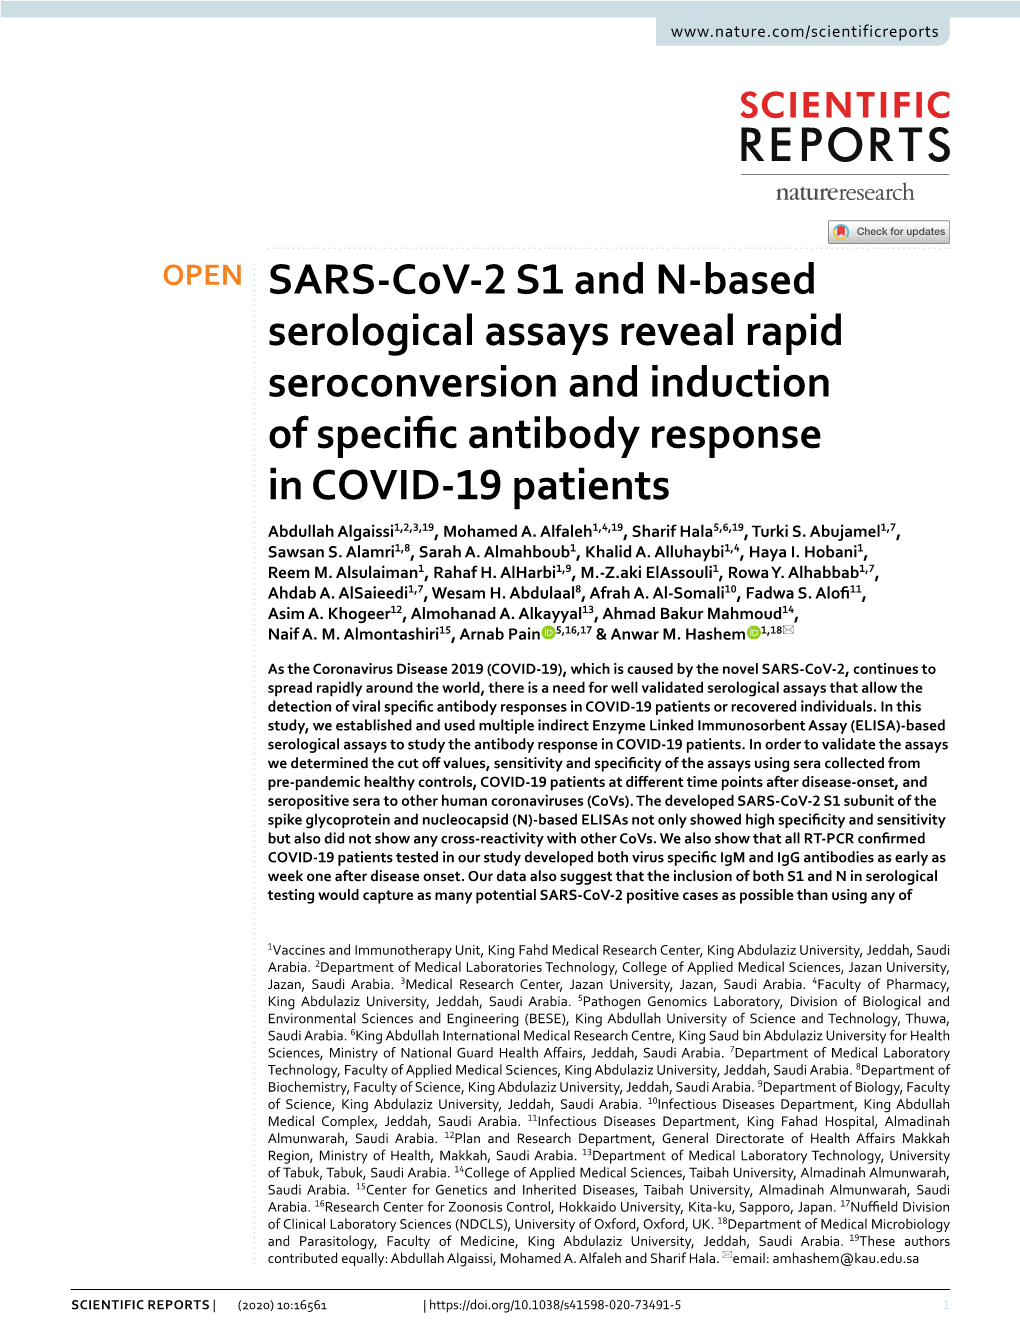 SARS-Cov-2 S1 and N-Based Serological Assays Reveal Rapid Seroconversion and Induction of Specific Antibody Response in COVID-19